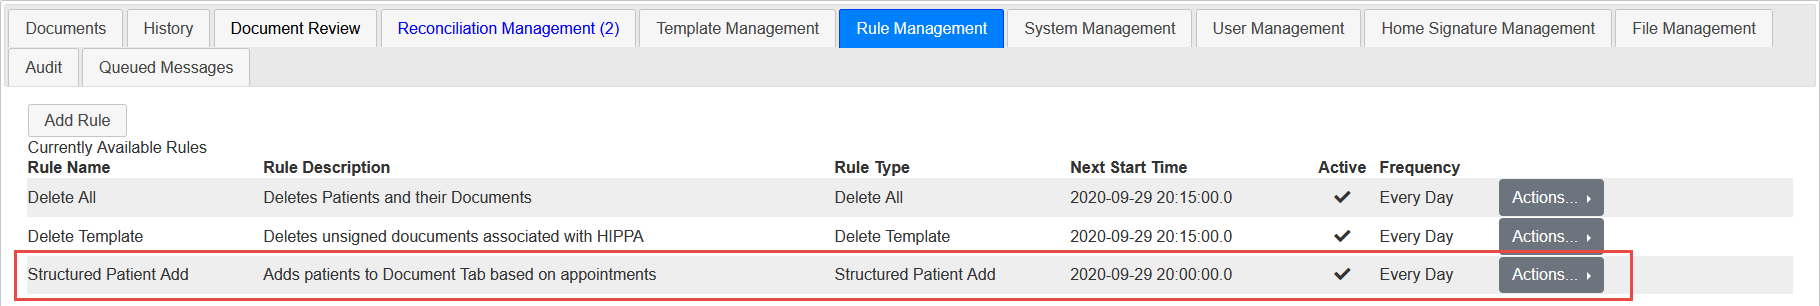 Screenshot Following Addition of Structured Patient Add Rule